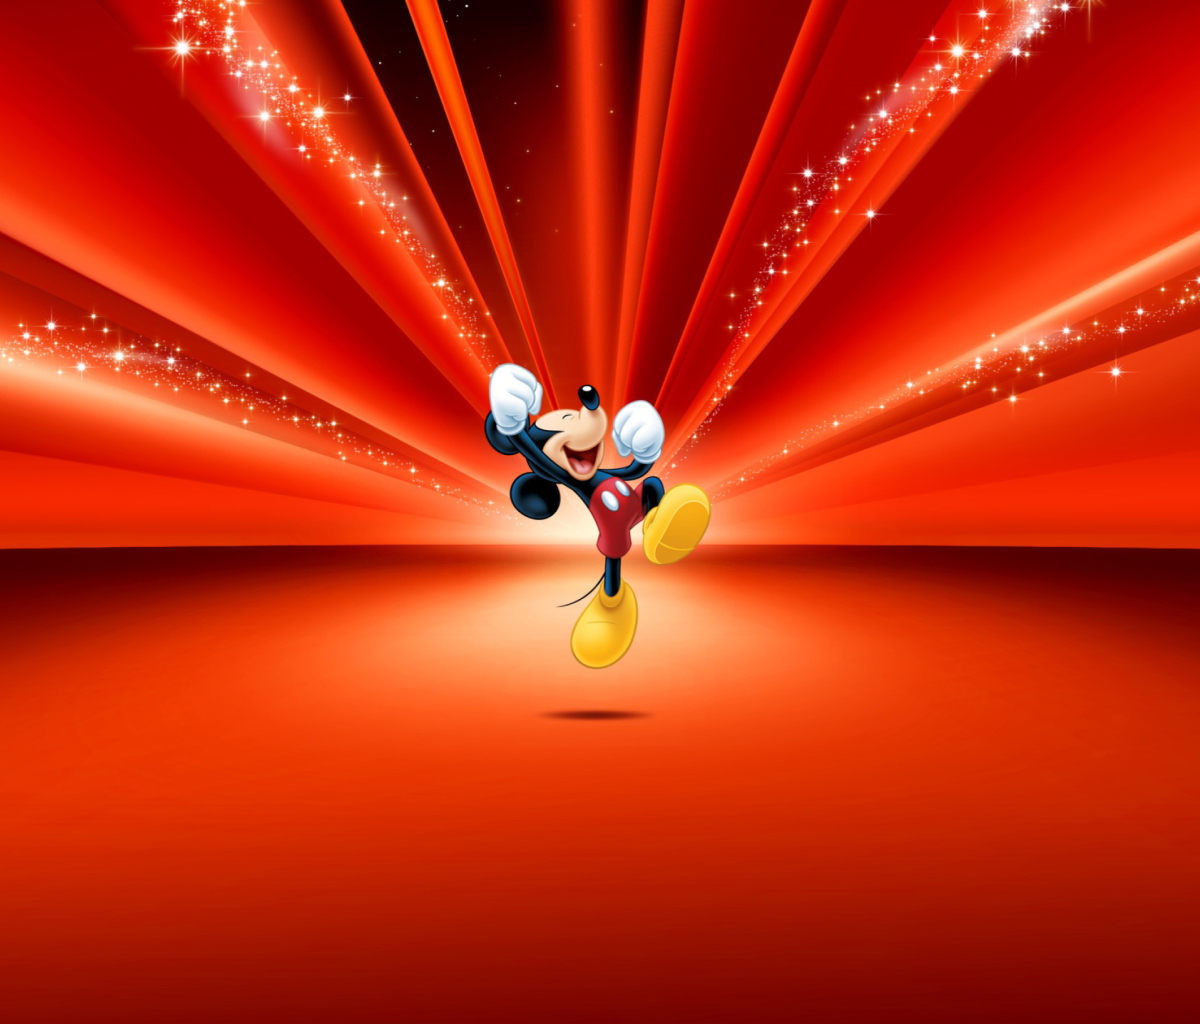 Mickey Mouse Disney Red Wallpaper wallpaper 1200x1024